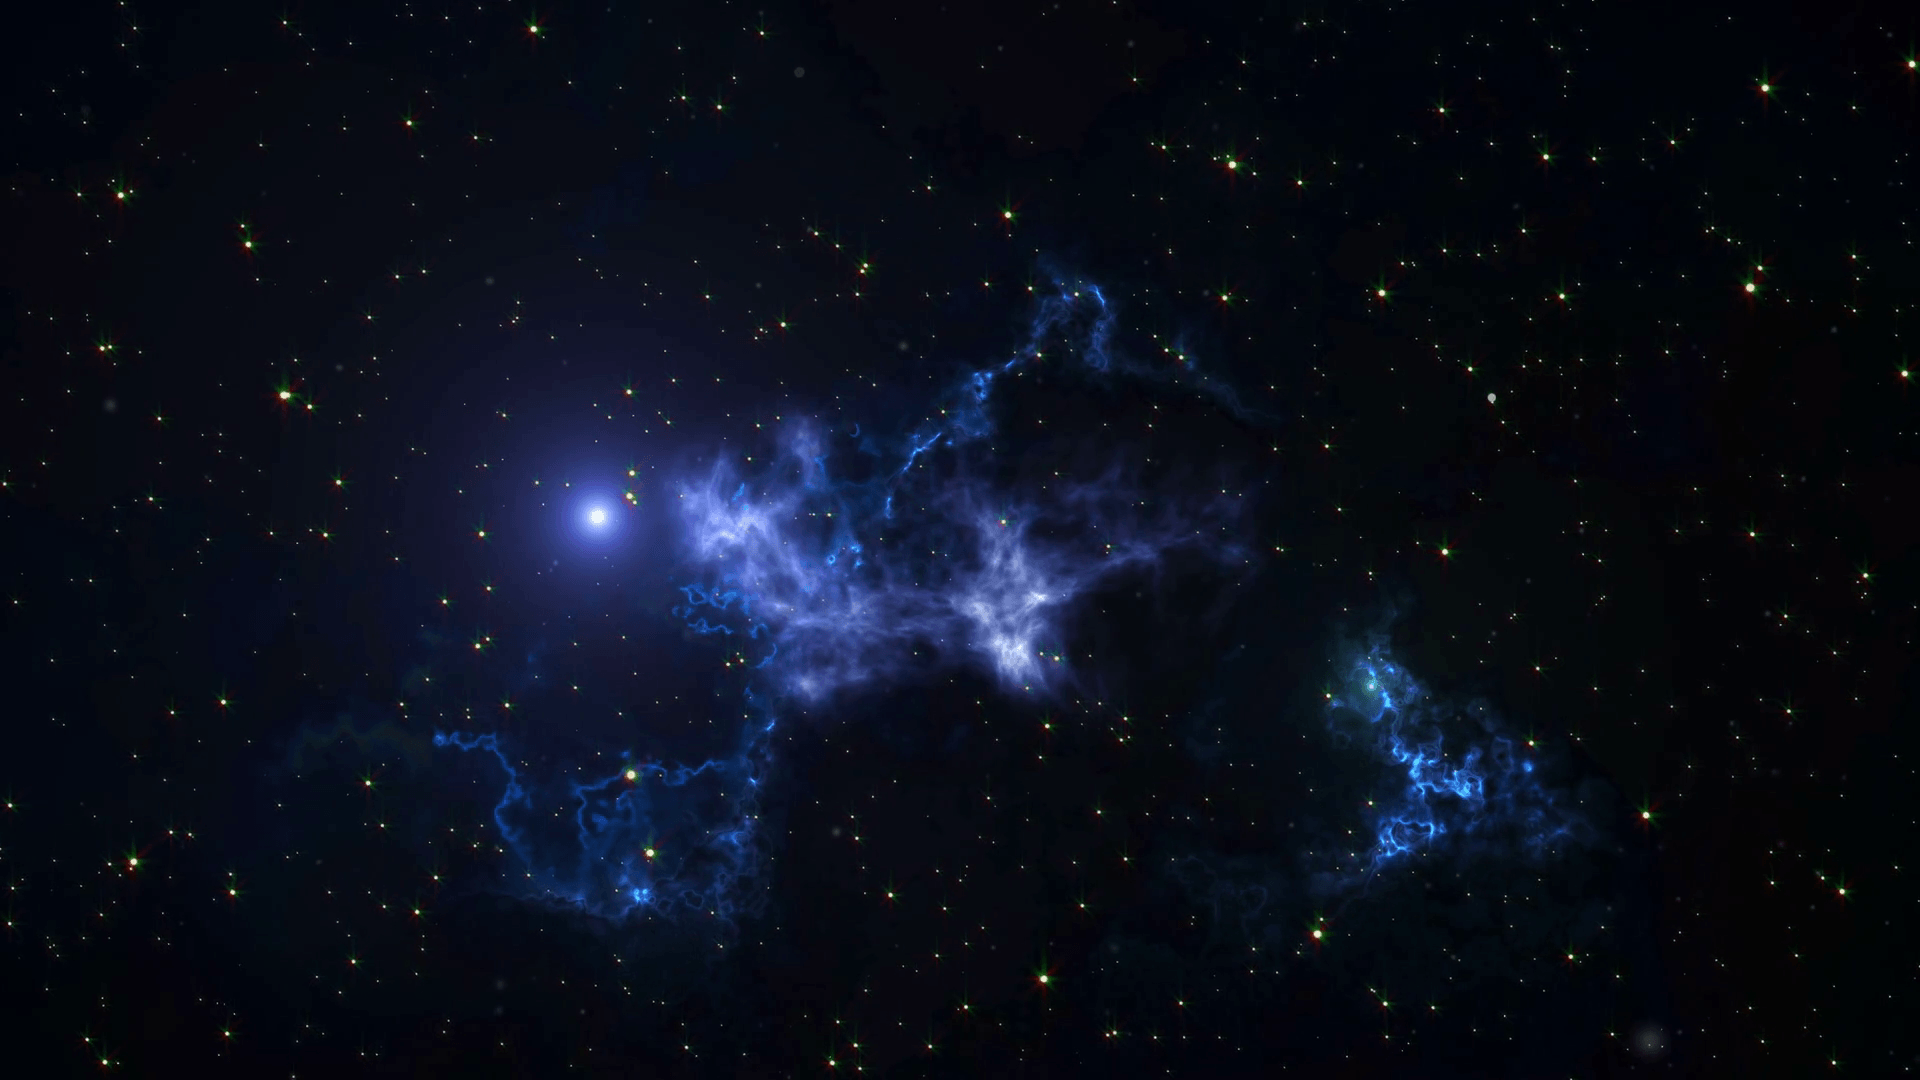 Space animation background with nebula, stars. The Milky Way